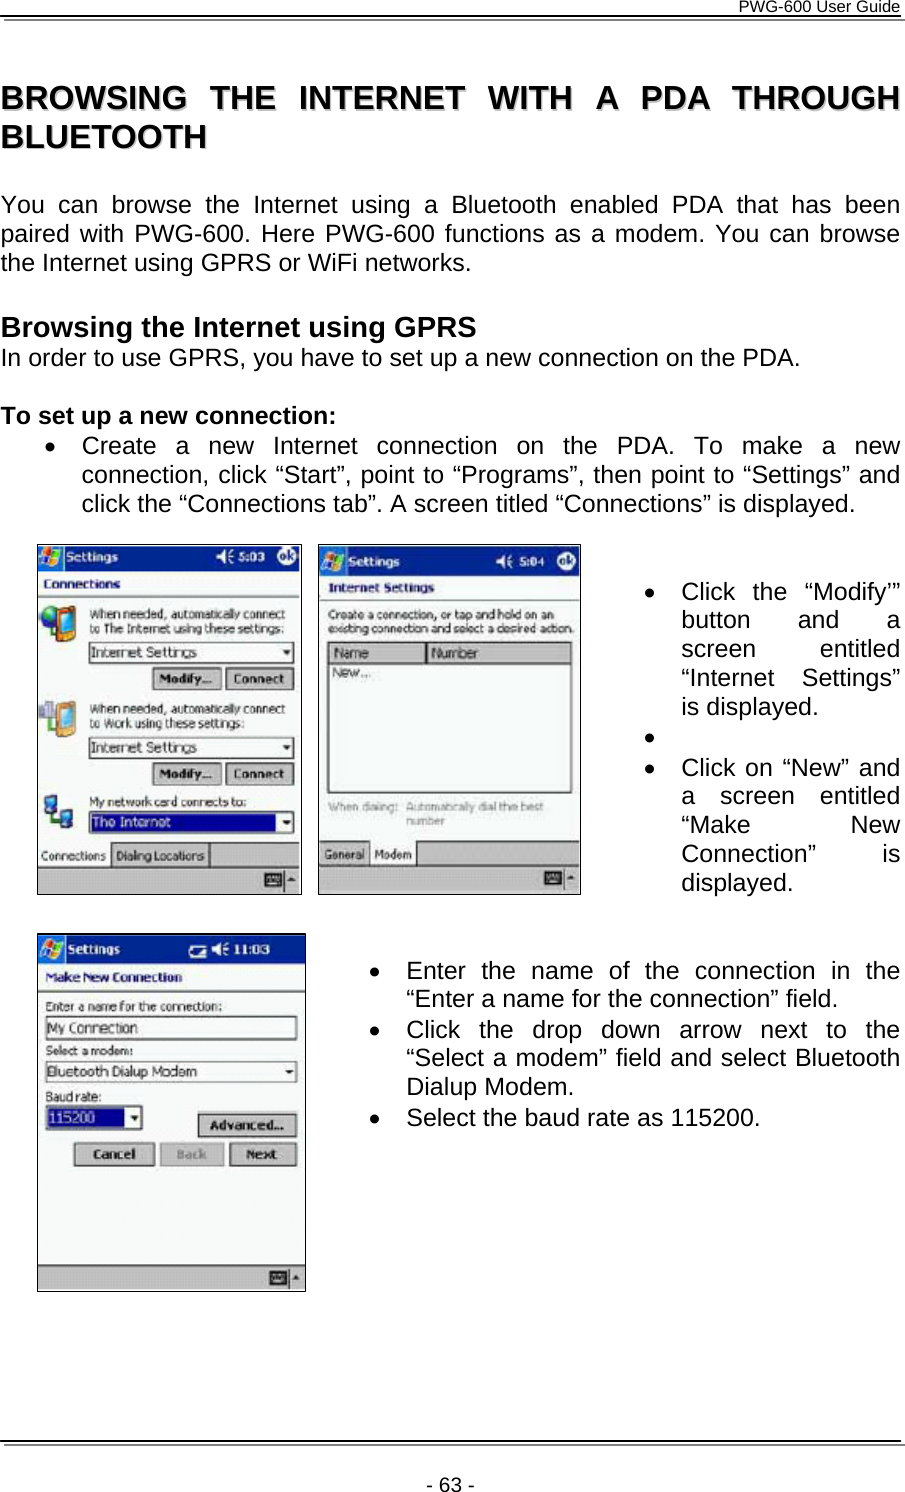      PWG-600 User Guide    - 63 - BBRROOWWSSIINNGG  TTHHEE  IINNTTEERRNNEETT  WWIITTHH  AA  PPDDAA  TTHHRROOUUGGHH  BBLLUUEETTOOOOTTHH     You can browse the Internet using a Bluetooth enabled PDA that has been paired with PWG-600. Here PWG-600 functions as a modem. You can browse the Internet using GPRS or WiFi networks.  Browsing the Internet using GPRS In order to use GPRS, you have to set up a new connection on the PDA.  To set up a new connection: •  Create a new Internet connection on the PDA. To make a new connection, click “Start”, point to “Programs”, then point to “Settings” and click the “Connections tab”. A screen titled “Connections” is displayed.   • Click the “Modify’” button and a screen entitled “Internet Settings” is displayed. •  •  Click on “New” and a screen entitled “Make New Connection” is displayed.   •  Enter the name of the connection in the “Enter a name for the connection” field. •  Click the drop down arrow next to the “Select a modem” field and select Bluetooth Dialup Modem.  •  Select the baud rate as 115200.  